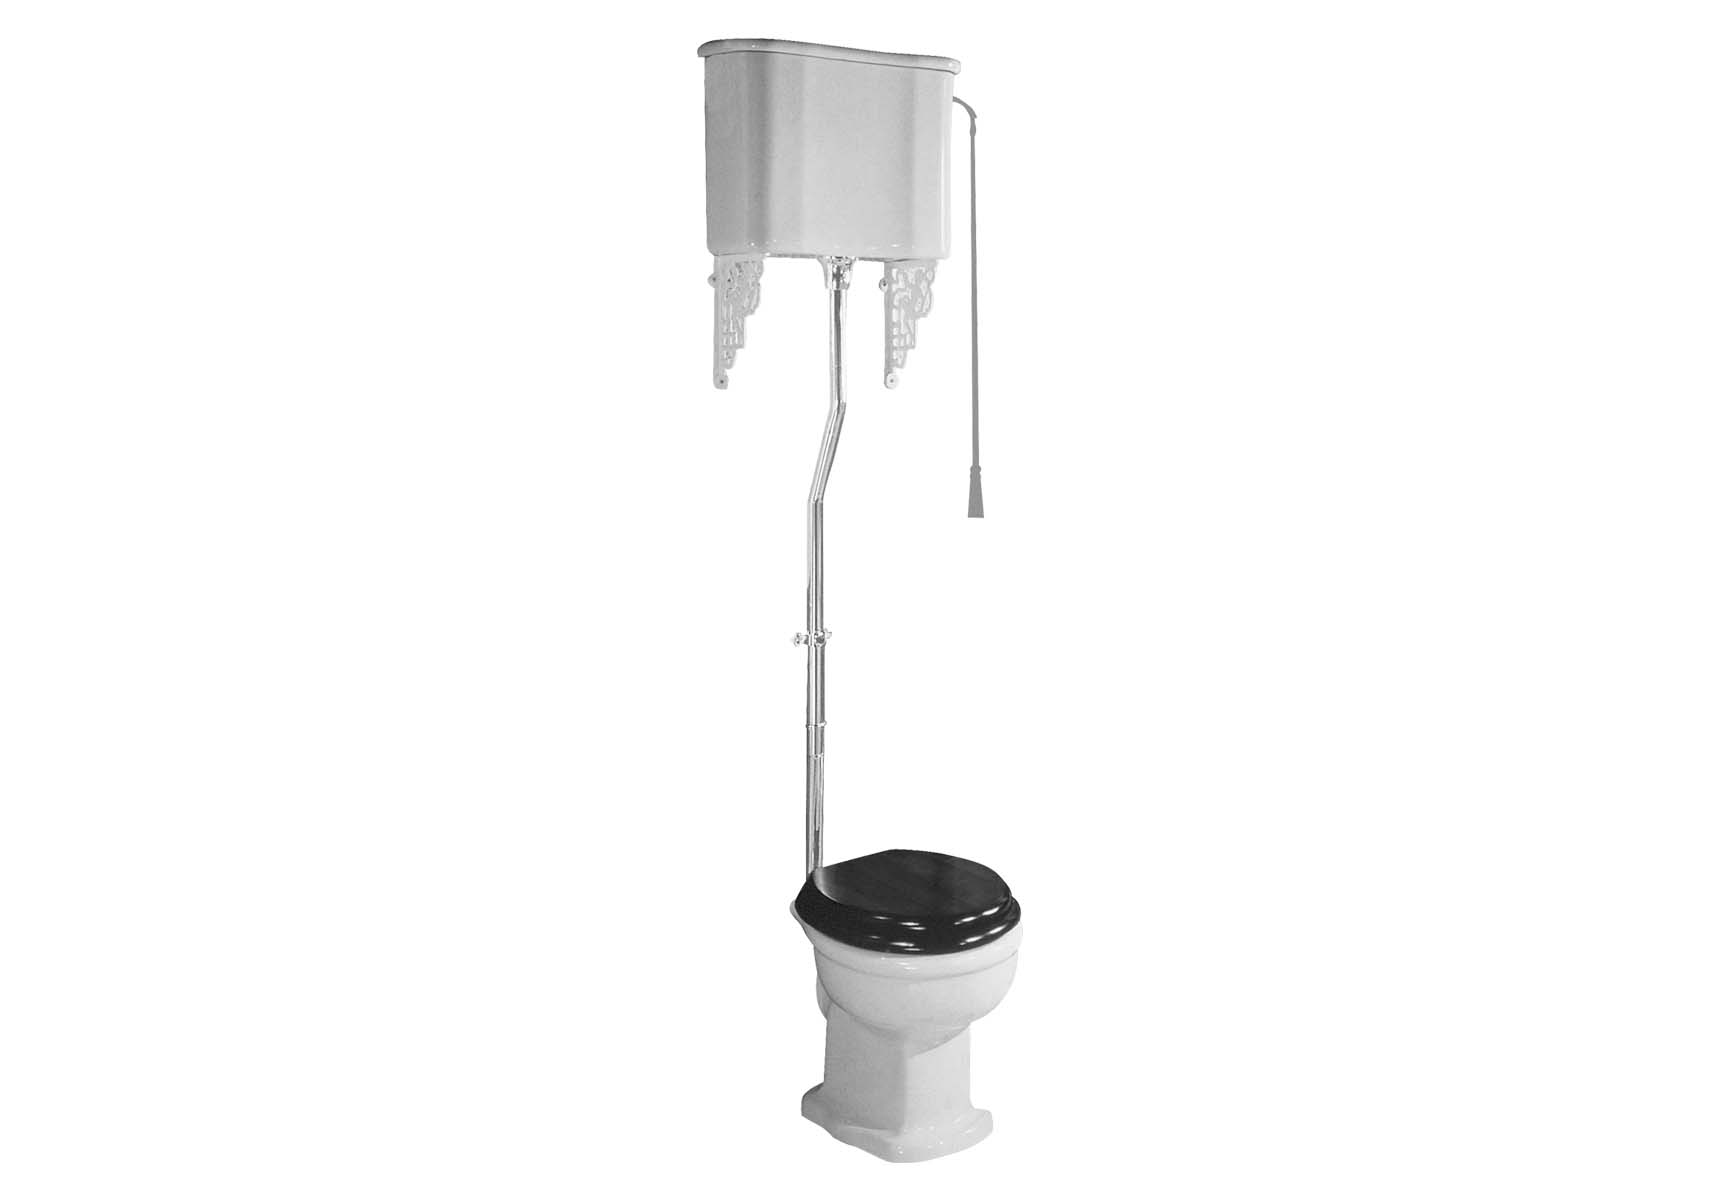 Aria Single WC Pan with Bottom Outlet without Bidet Pipe